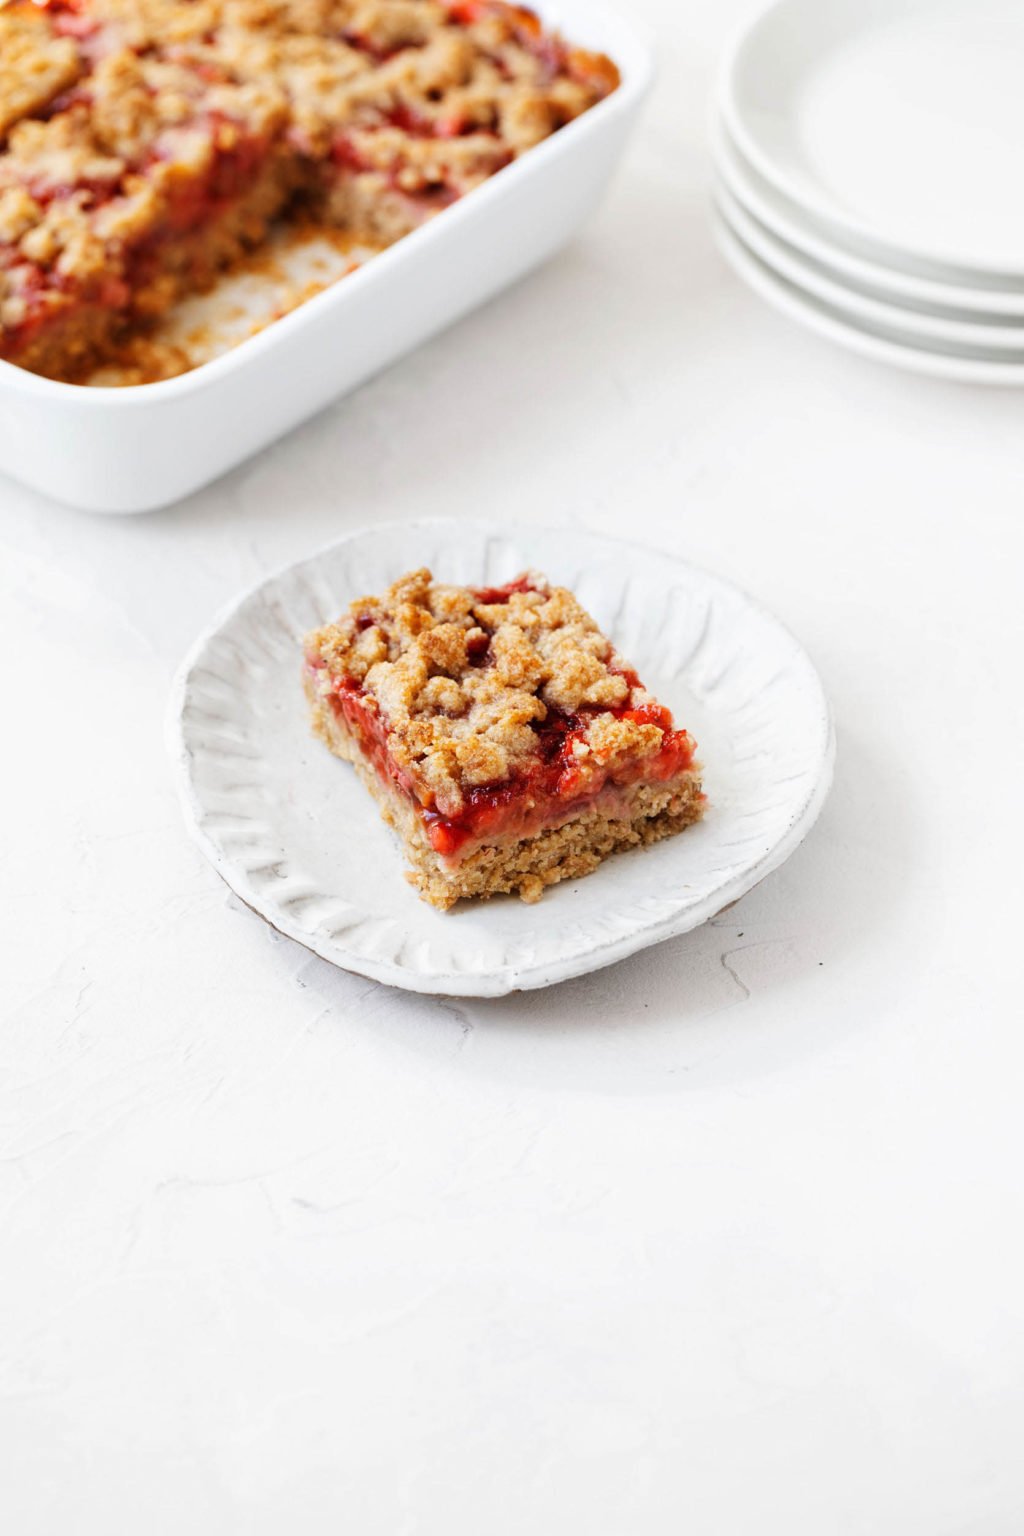 An angled photo of a vegan strawberry rhubarb crumble bar, which is served on a small white dessert plate. There's a rectangular baking dish in the background.